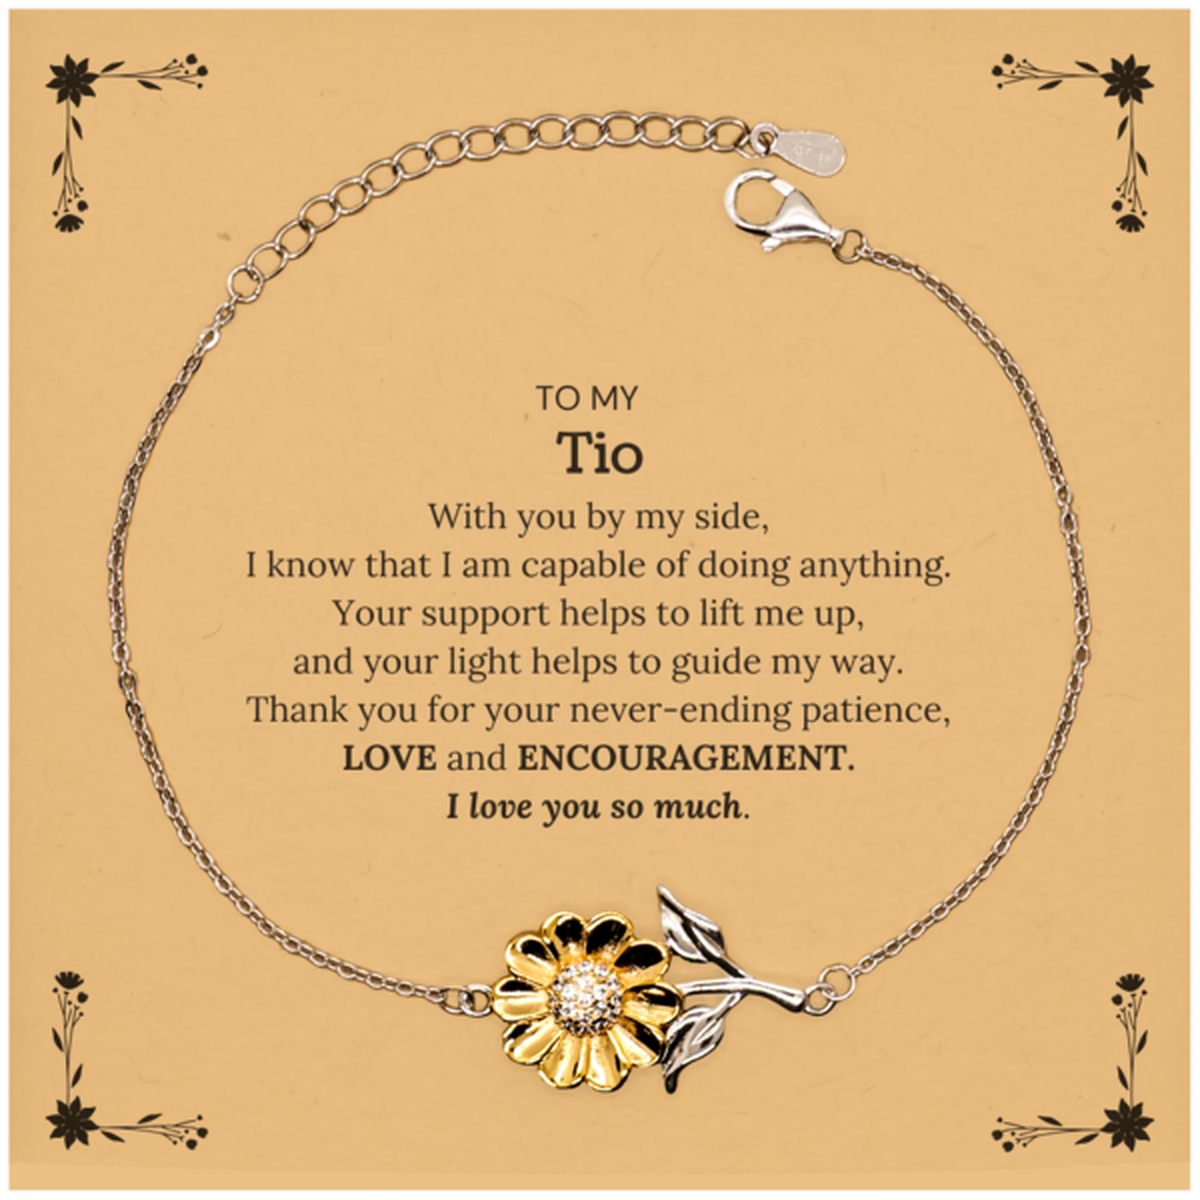 Appreciation Tio Sunflower Bracelet Gifts, To My Tio Birthday Christmas Wedding Keepsake Gifts for Tio With you by my side, I know that I am capable of doing anything. I love you so much